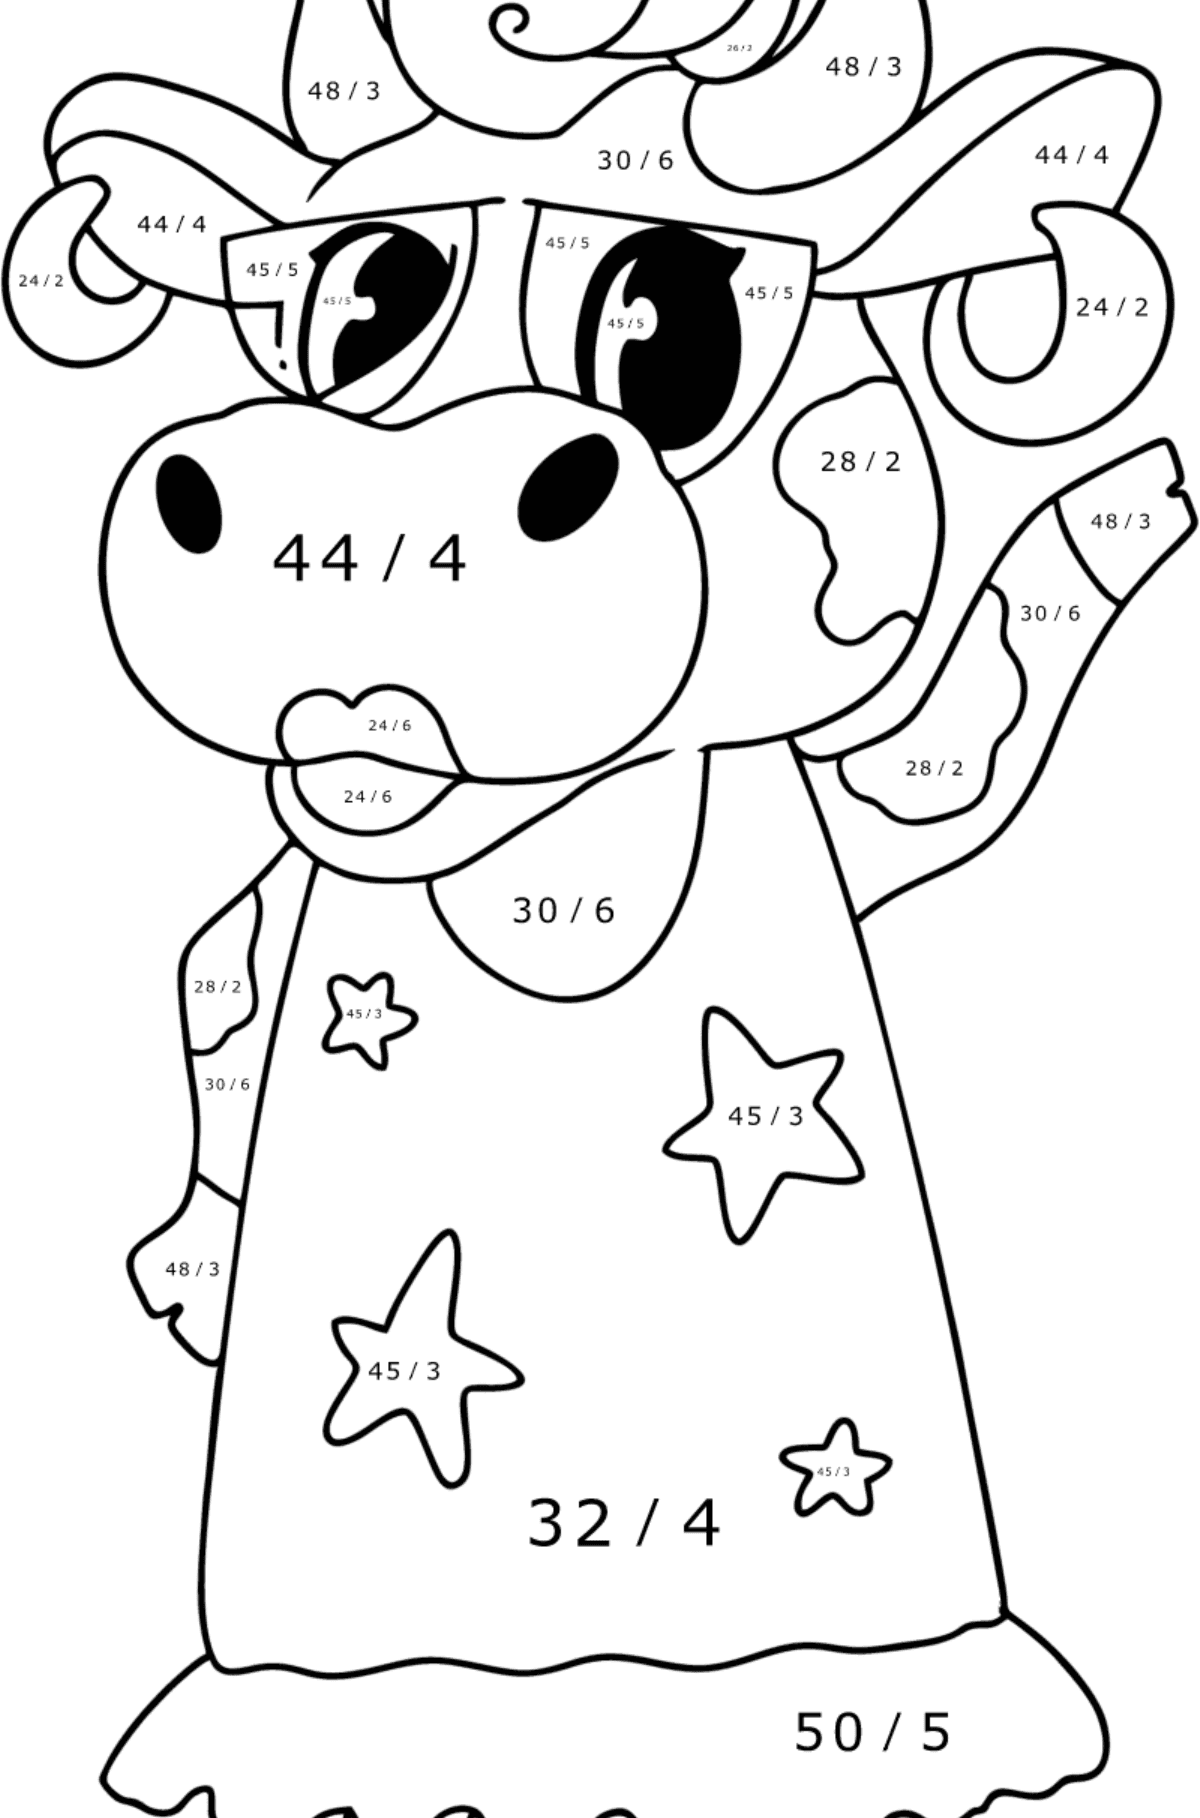 Cartoon cow standing up coloring page - Math Coloring - Division for Kids